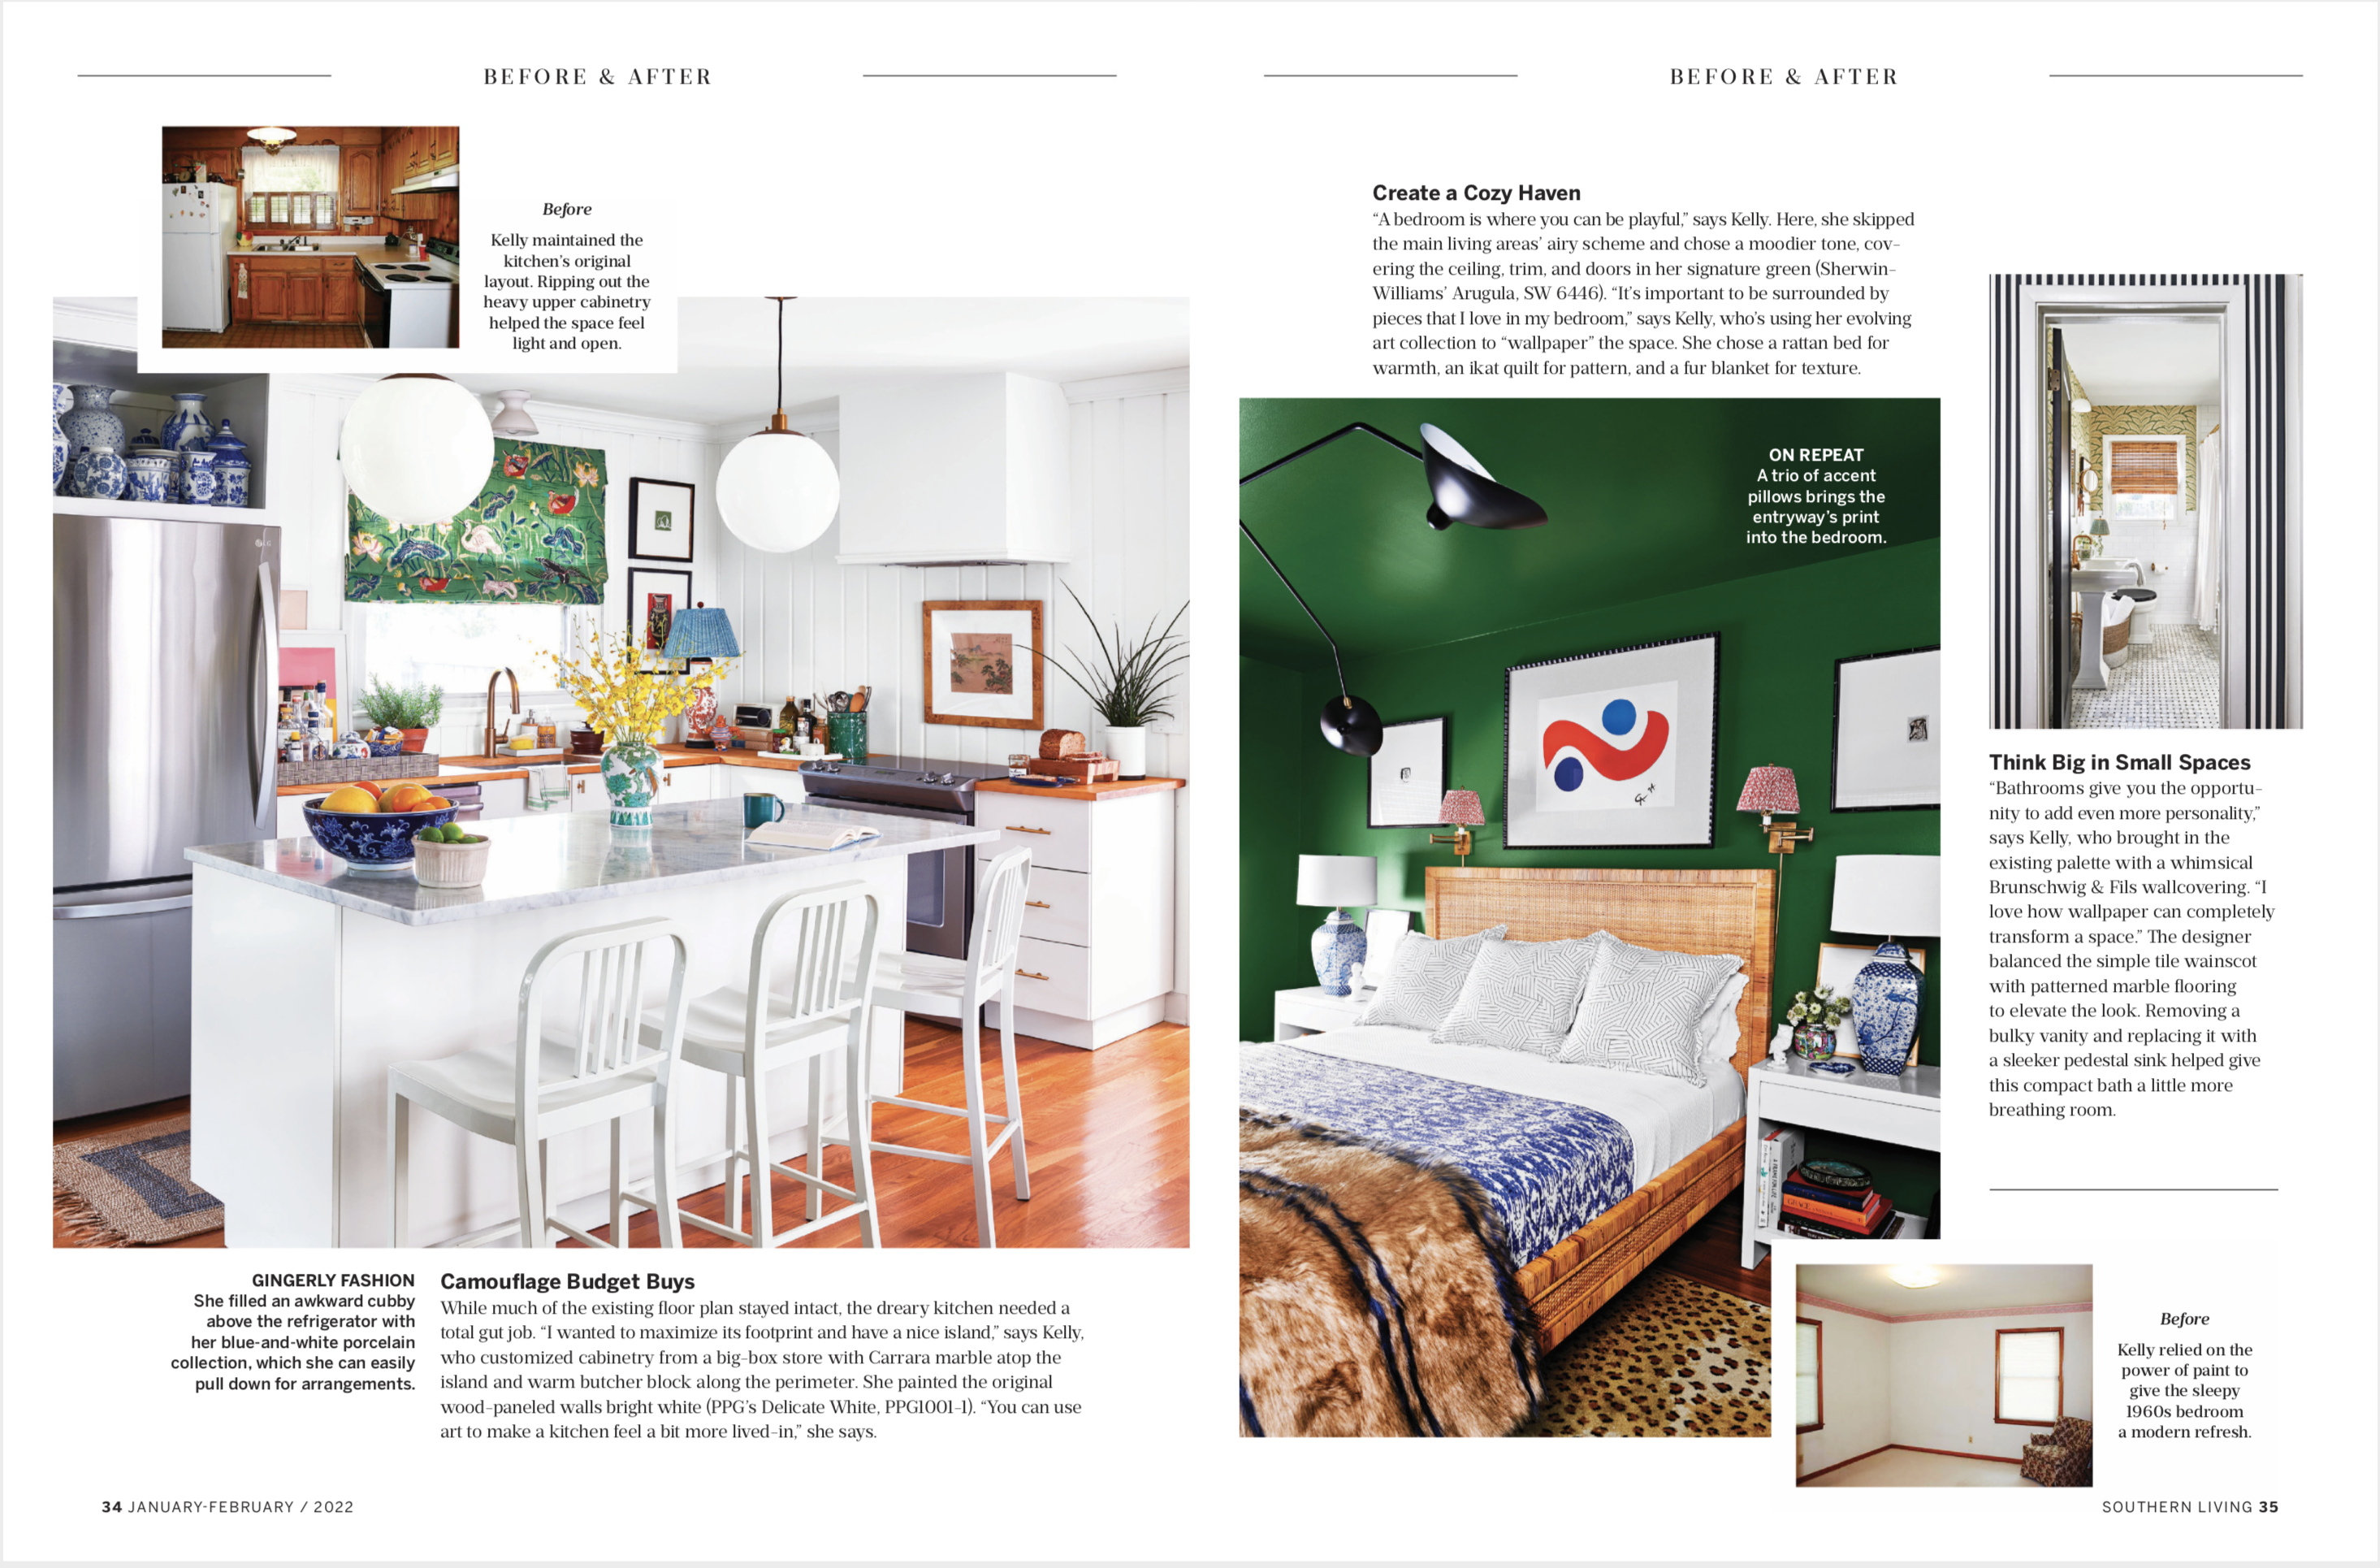 Southern Living Magazine spread 3 of Meg Kelly  by Alison Gootee photography